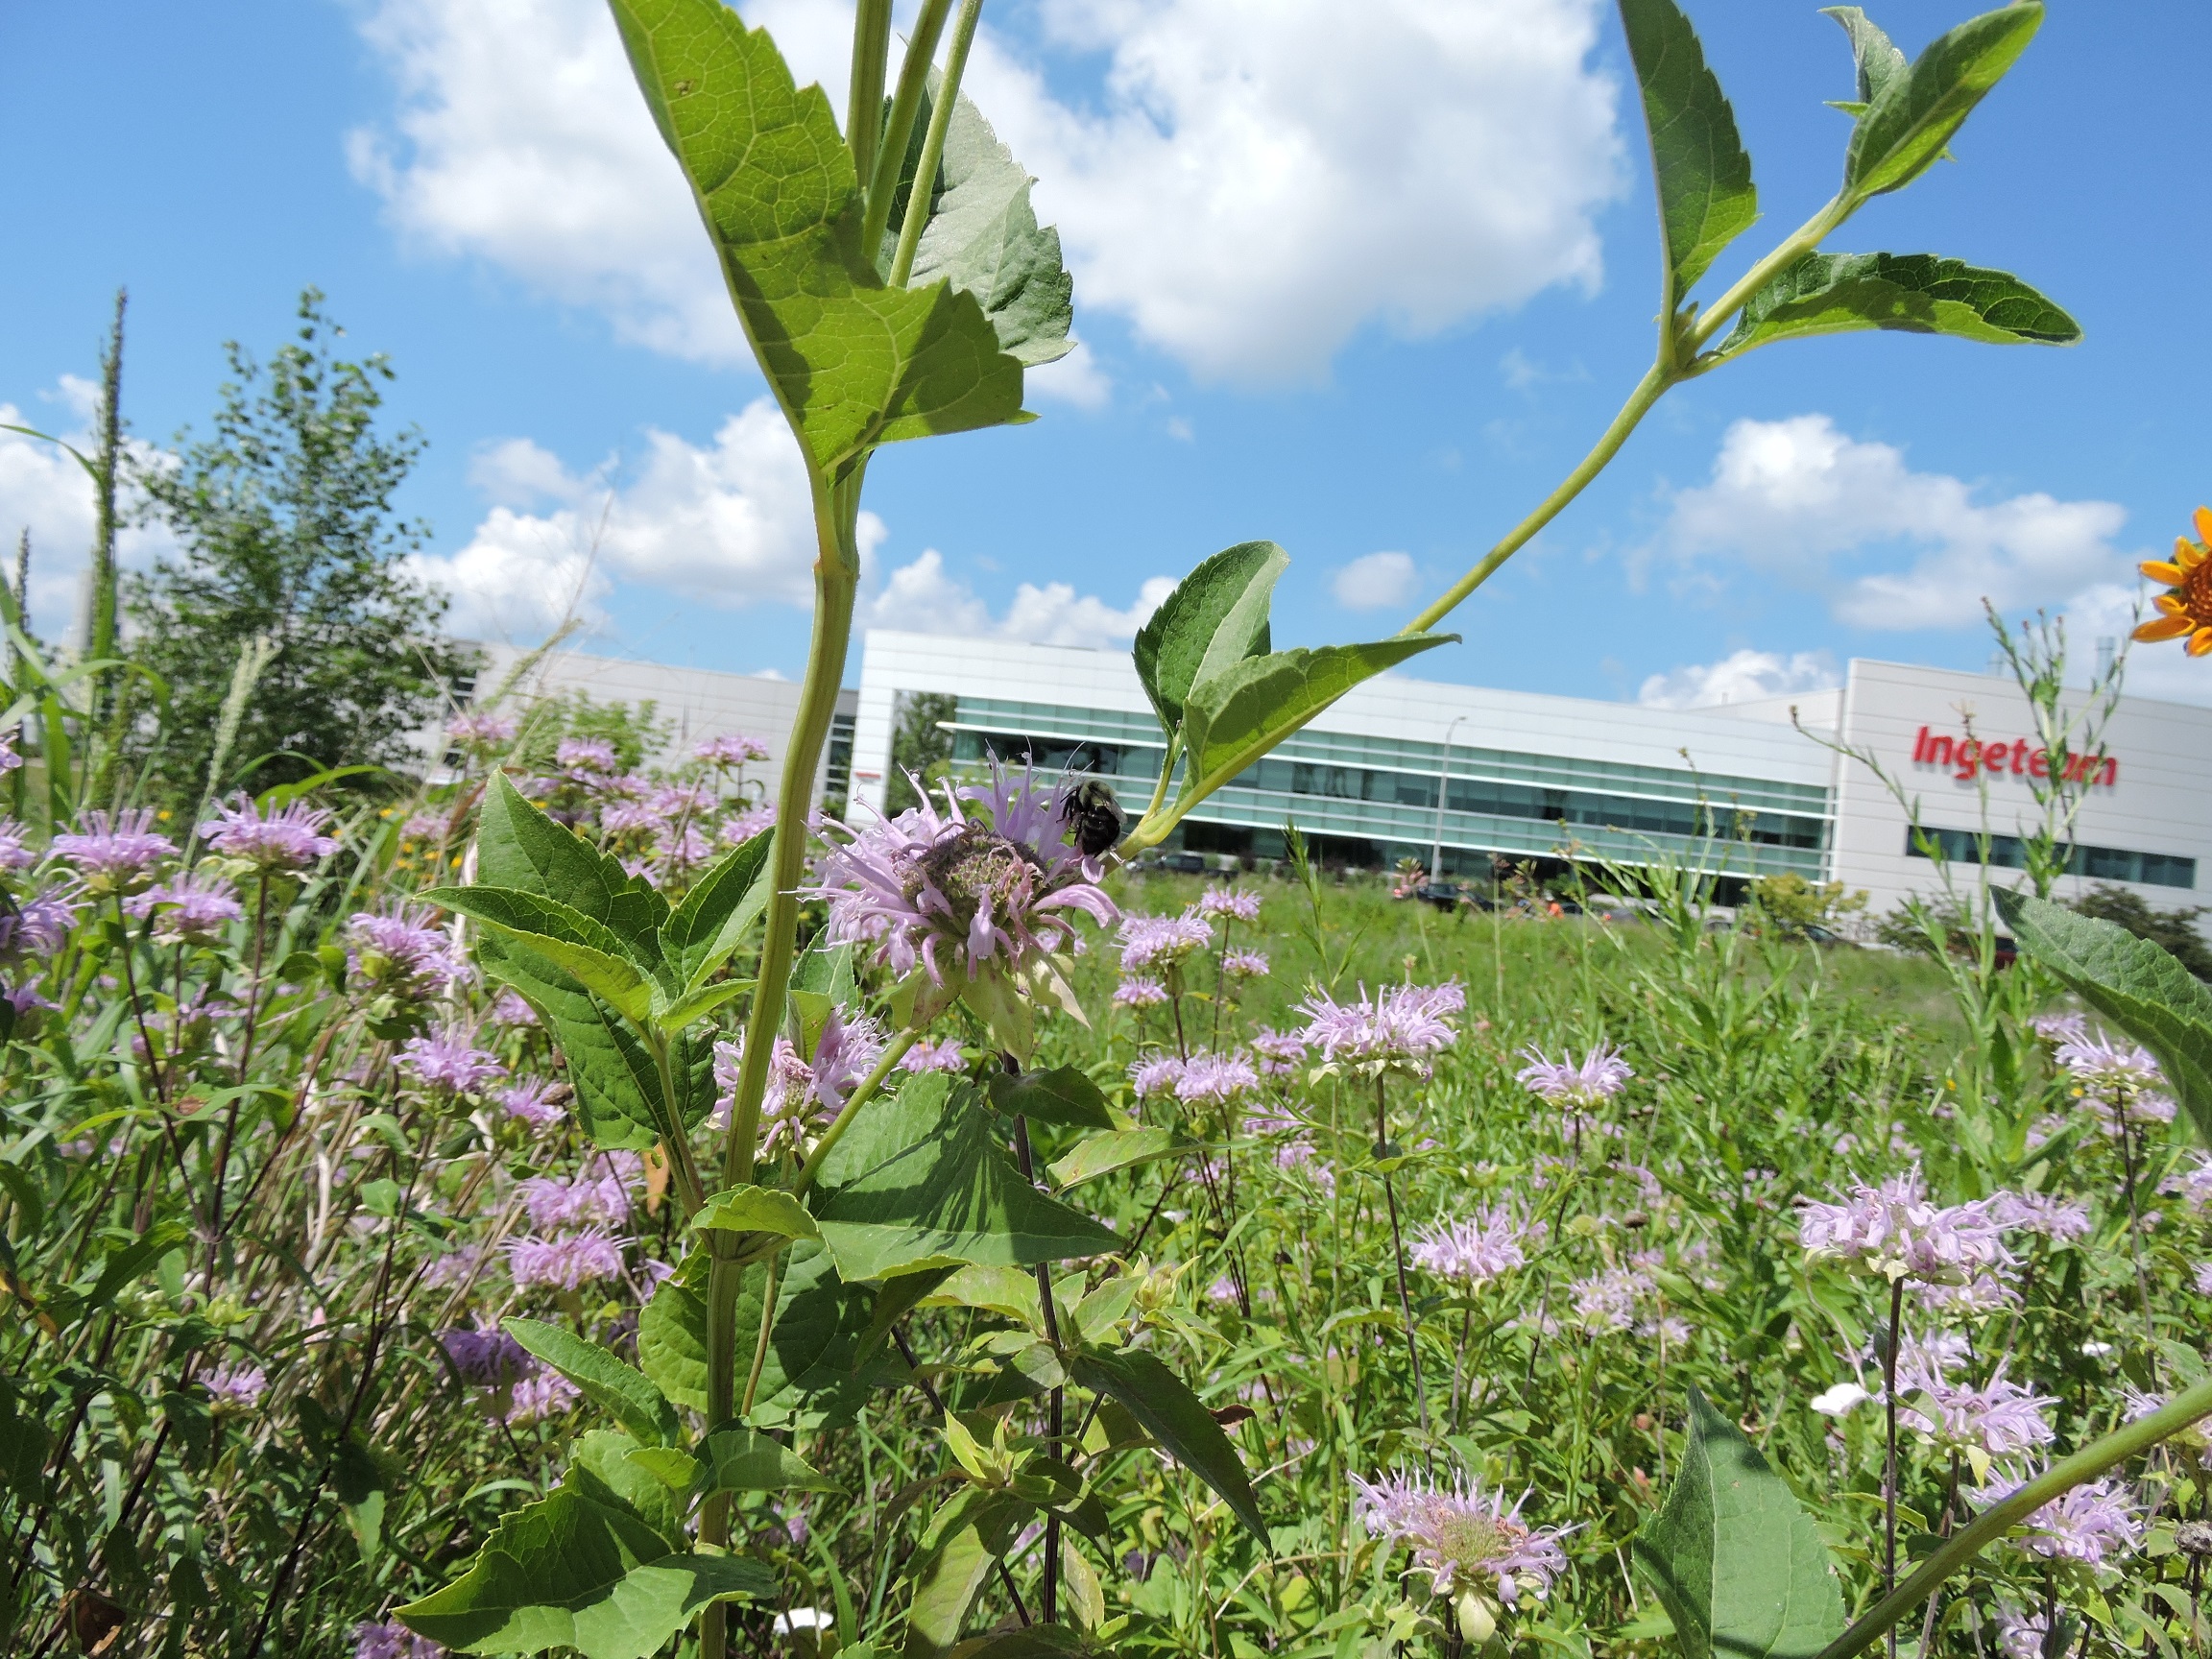 Menomonee Valley Partners, Urban Ecology Center Complete Transformation of 24-Acre Brownfield